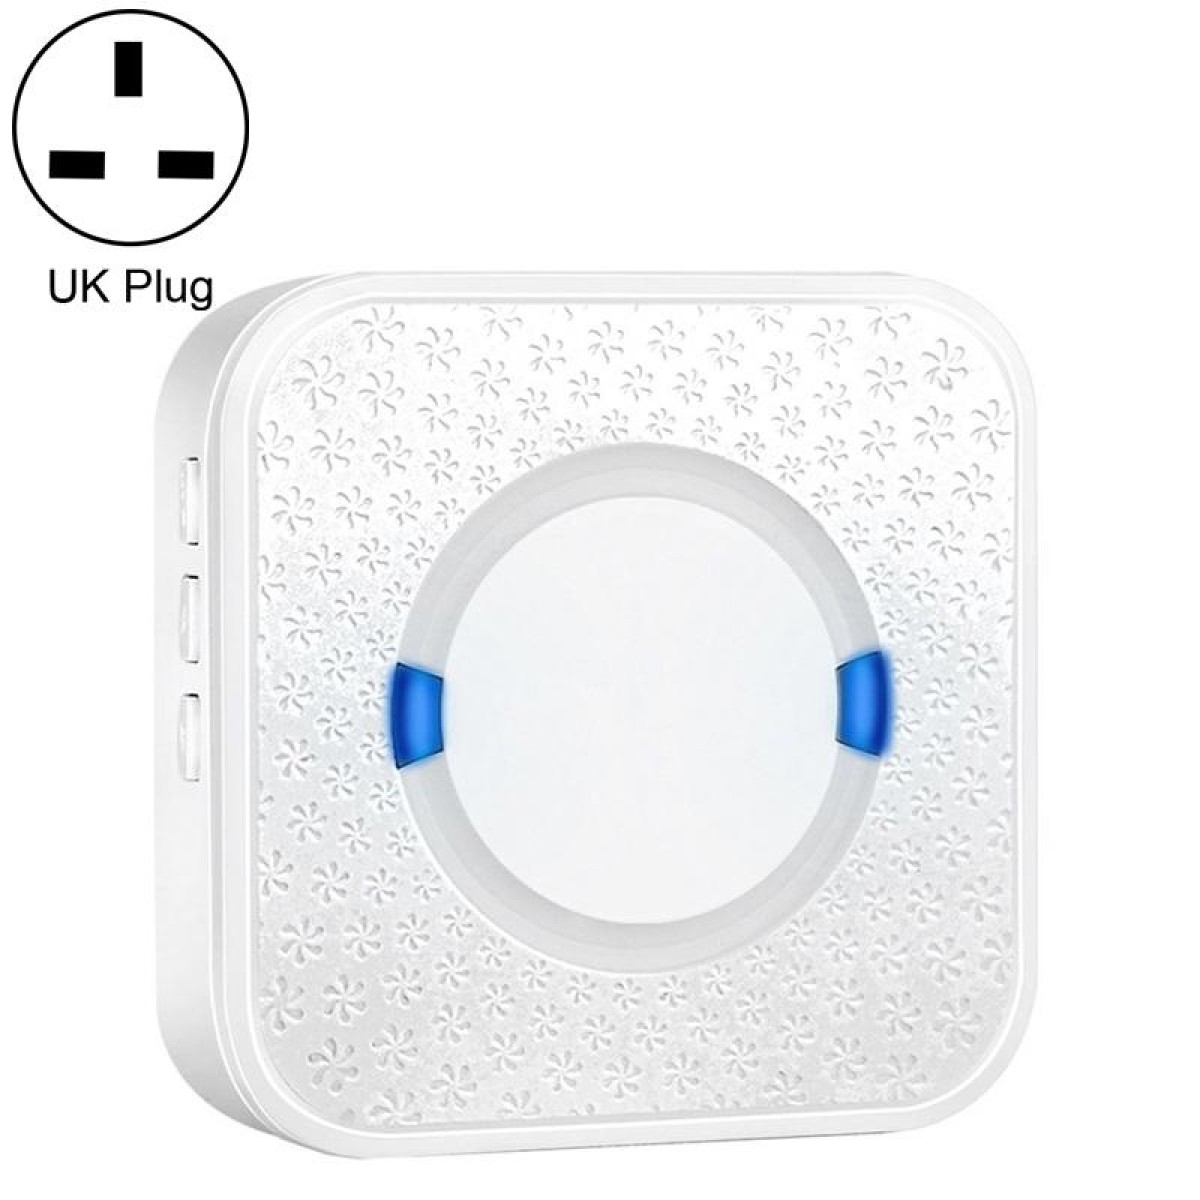 P6 110dB Wireless IP55 Waterproof Low Power Consumption WiFi Doing-dong Doorbell Receiver, Receiver Distance: 300m, UK Plug(White)